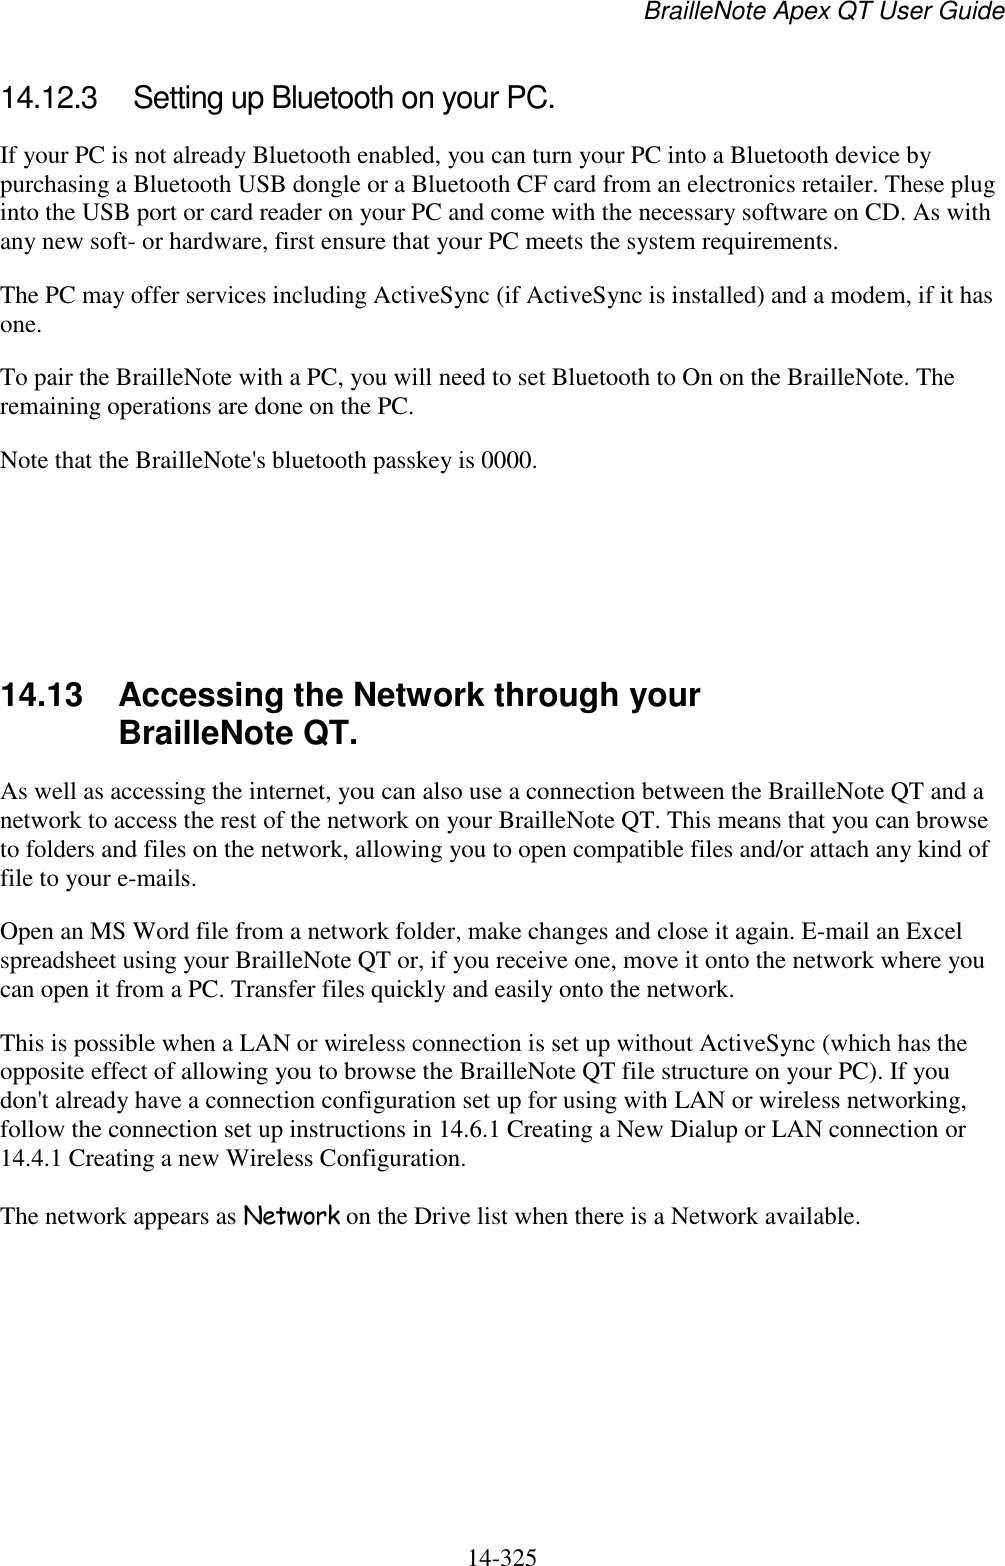 BrailleNote Apex QT User Guide  14-325   14.12.3  Setting up Bluetooth on your PC. If your PC is not already Bluetooth enabled, you can turn your PC into a Bluetooth device by purchasing a Bluetooth USB dongle or a Bluetooth CF card from an electronics retailer. These plug into the USB port or card reader on your PC and come with the necessary software on CD. As with any new soft- or hardware, first ensure that your PC meets the system requirements. The PC may offer services including ActiveSync (if ActiveSync is installed) and a modem, if it has one.  To pair the BrailleNote with a PC, you will need to set Bluetooth to On on the BrailleNote. The remaining operations are done on the PC. Note that the BrailleNote&apos;s bluetooth passkey is 0000.      14.13  Accessing the Network through your BrailleNote QT. As well as accessing the internet, you can also use a connection between the BrailleNote QT and a network to access the rest of the network on your BrailleNote QT. This means that you can browse to folders and files on the network, allowing you to open compatible files and/or attach any kind of file to your e-mails.  Open an MS Word file from a network folder, make changes and close it again. E-mail an Excel spreadsheet using your BrailleNote QT or, if you receive one, move it onto the network where you can open it from a PC. Transfer files quickly and easily onto the network. This is possible when a LAN or wireless connection is set up without ActiveSync (which has the opposite effect of allowing you to browse the BrailleNote QT file structure on your PC). If you don&apos;t already have a connection configuration set up for using with LAN or wireless networking, follow the connection set up instructions in 14.6.1 Creating a New Dialup or LAN connection or 14.4.1 Creating a new Wireless Configuration. The network appears as Network on the Drive list when there is a Network available.   